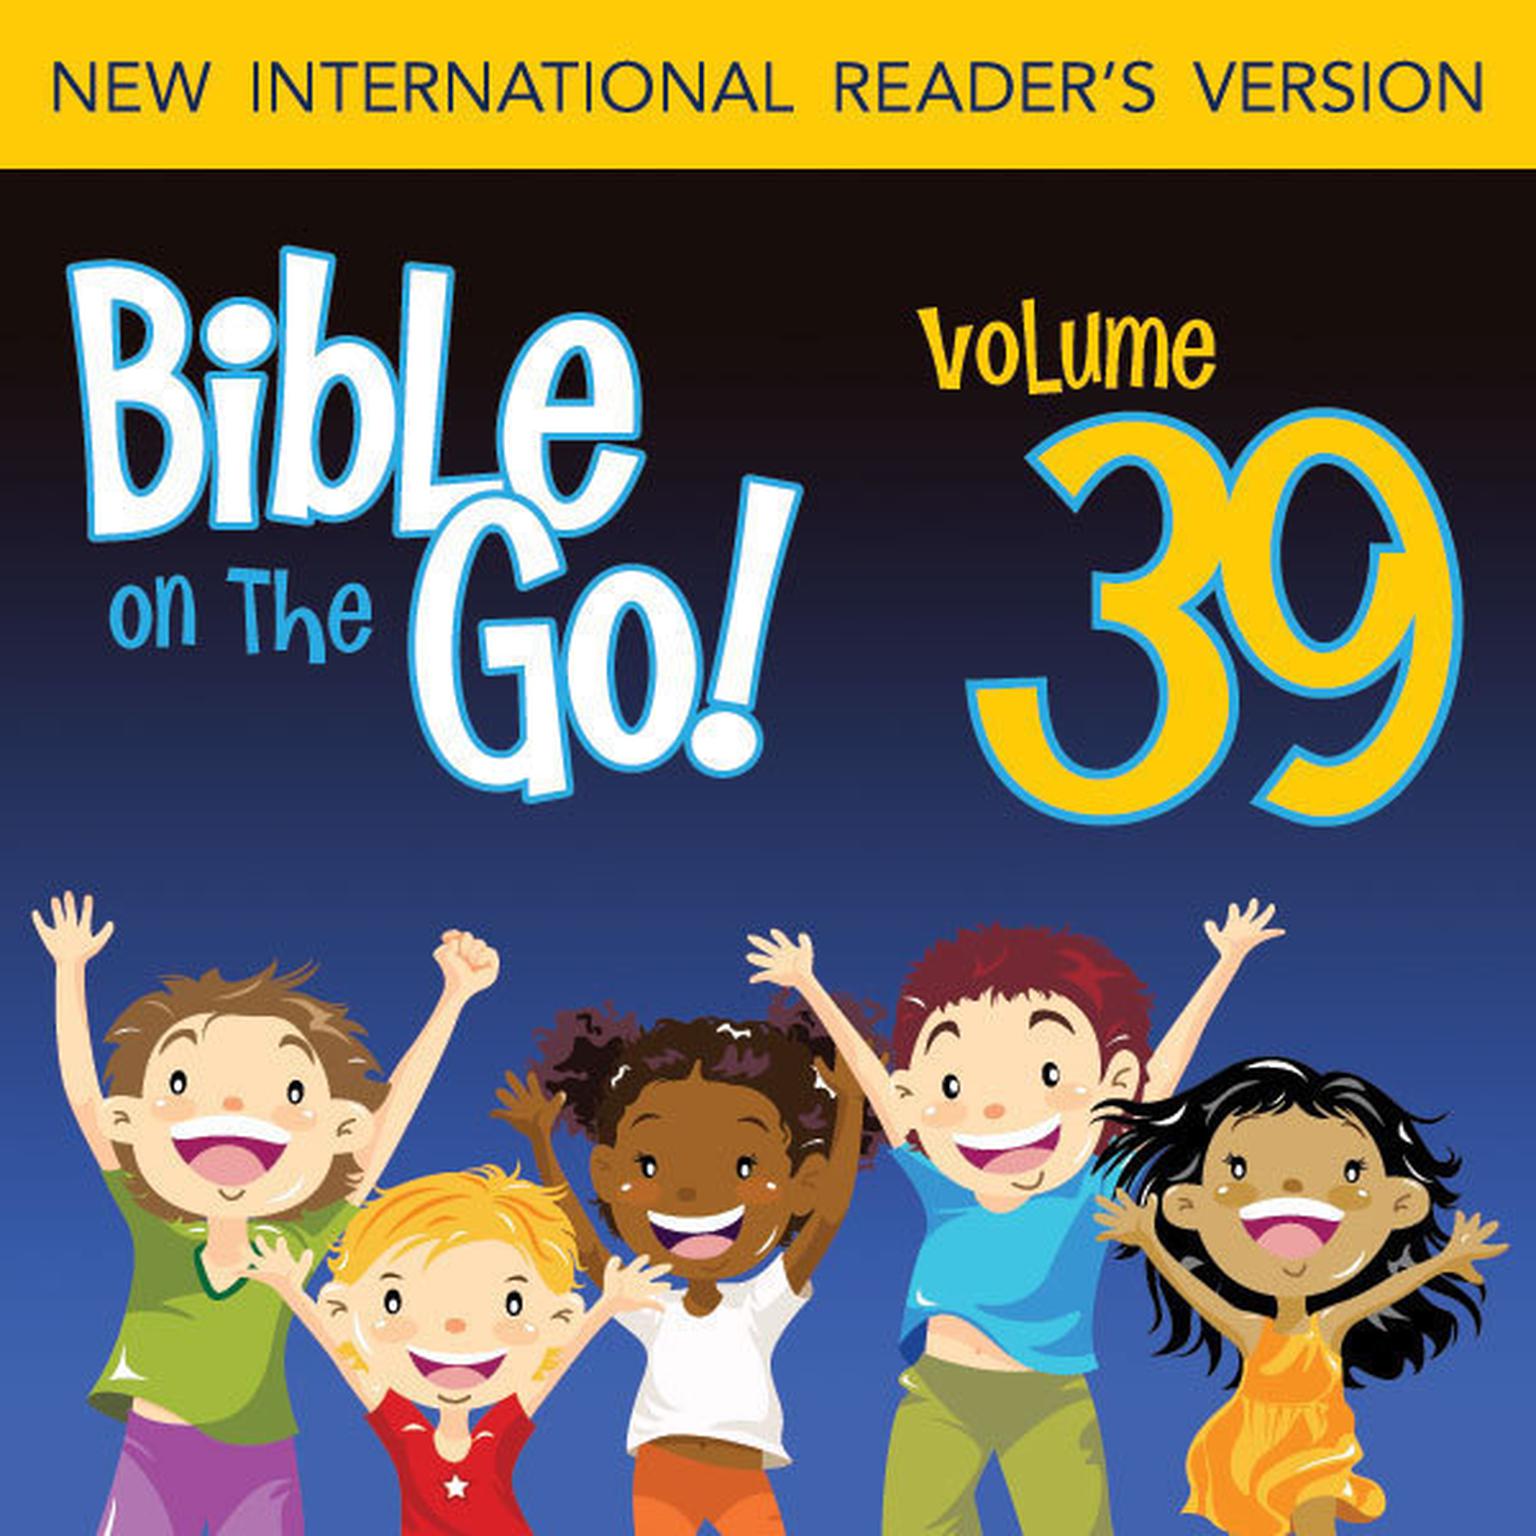 Bible on the Go Audio Bible - New International Readers Version, NIrV: Vol. 39 Parables and Miracles of Jesus, Part 3 (Luke 15, 17, 19; John 11; Matthew 18) Audiobook, by Zondervan